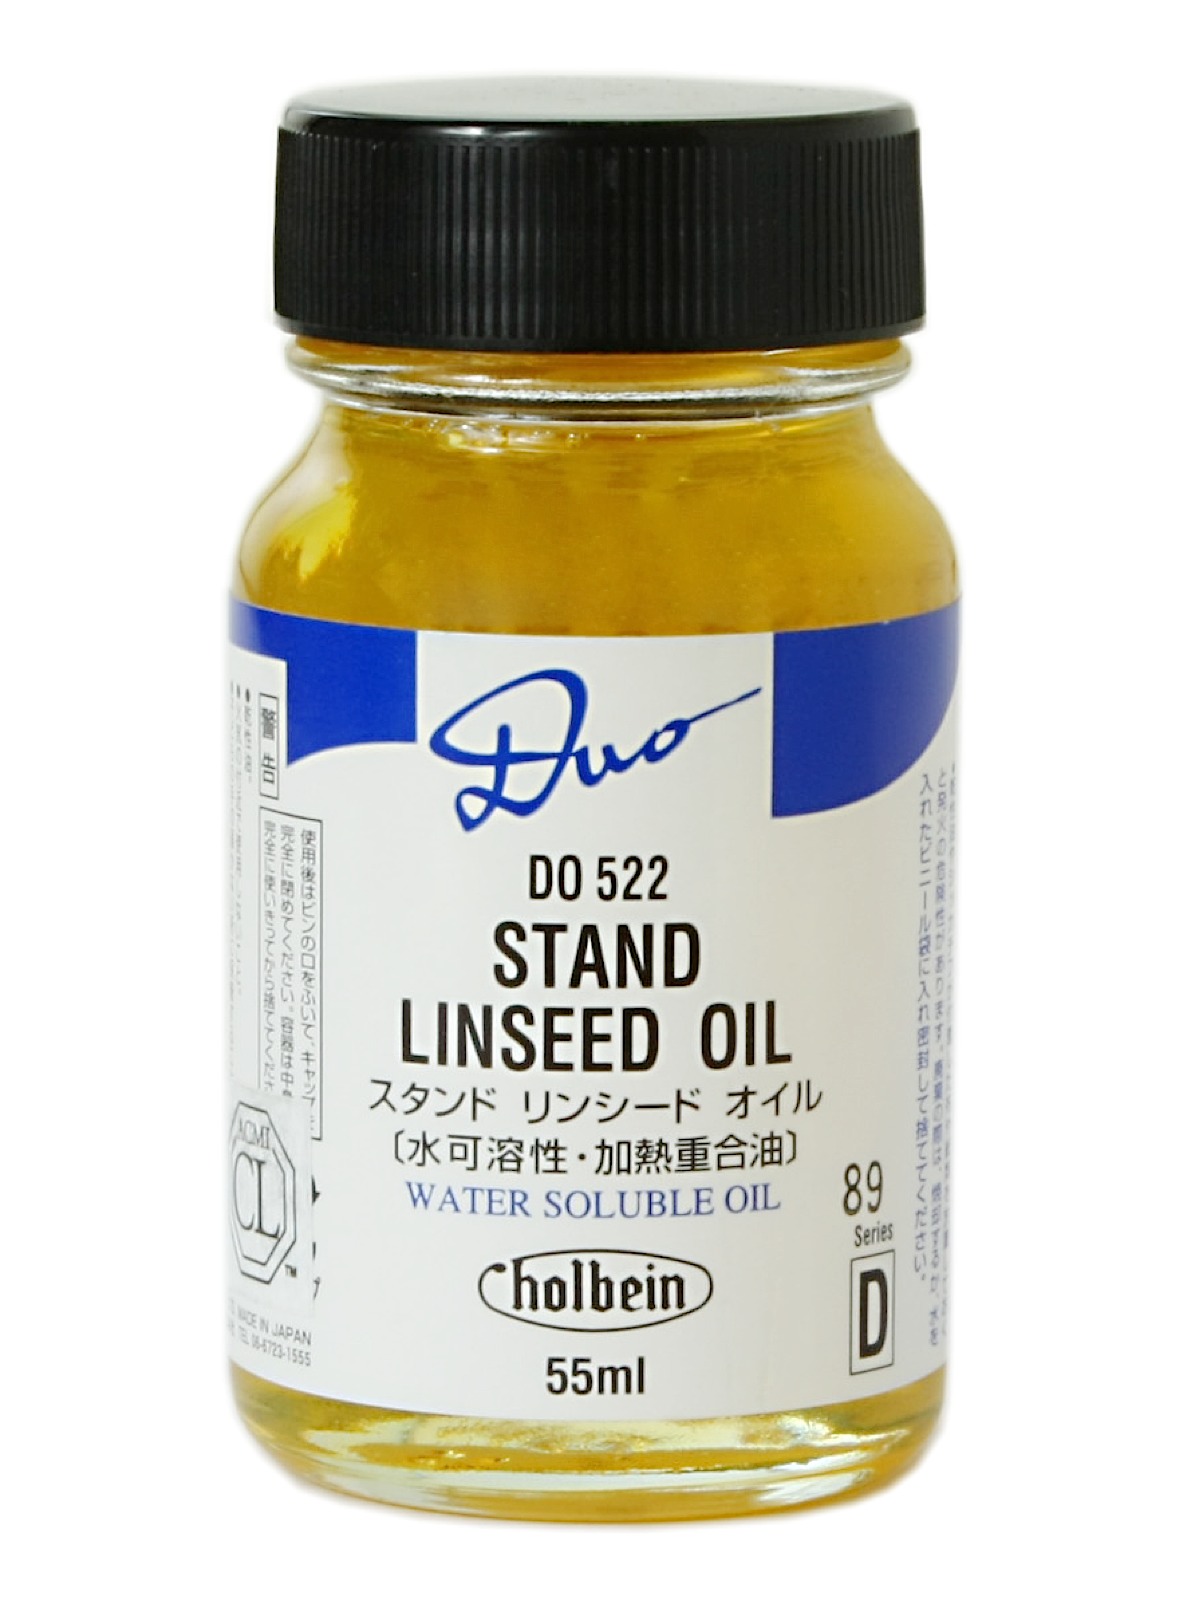 Holbein Duo Aqua Stand Linseed Oil